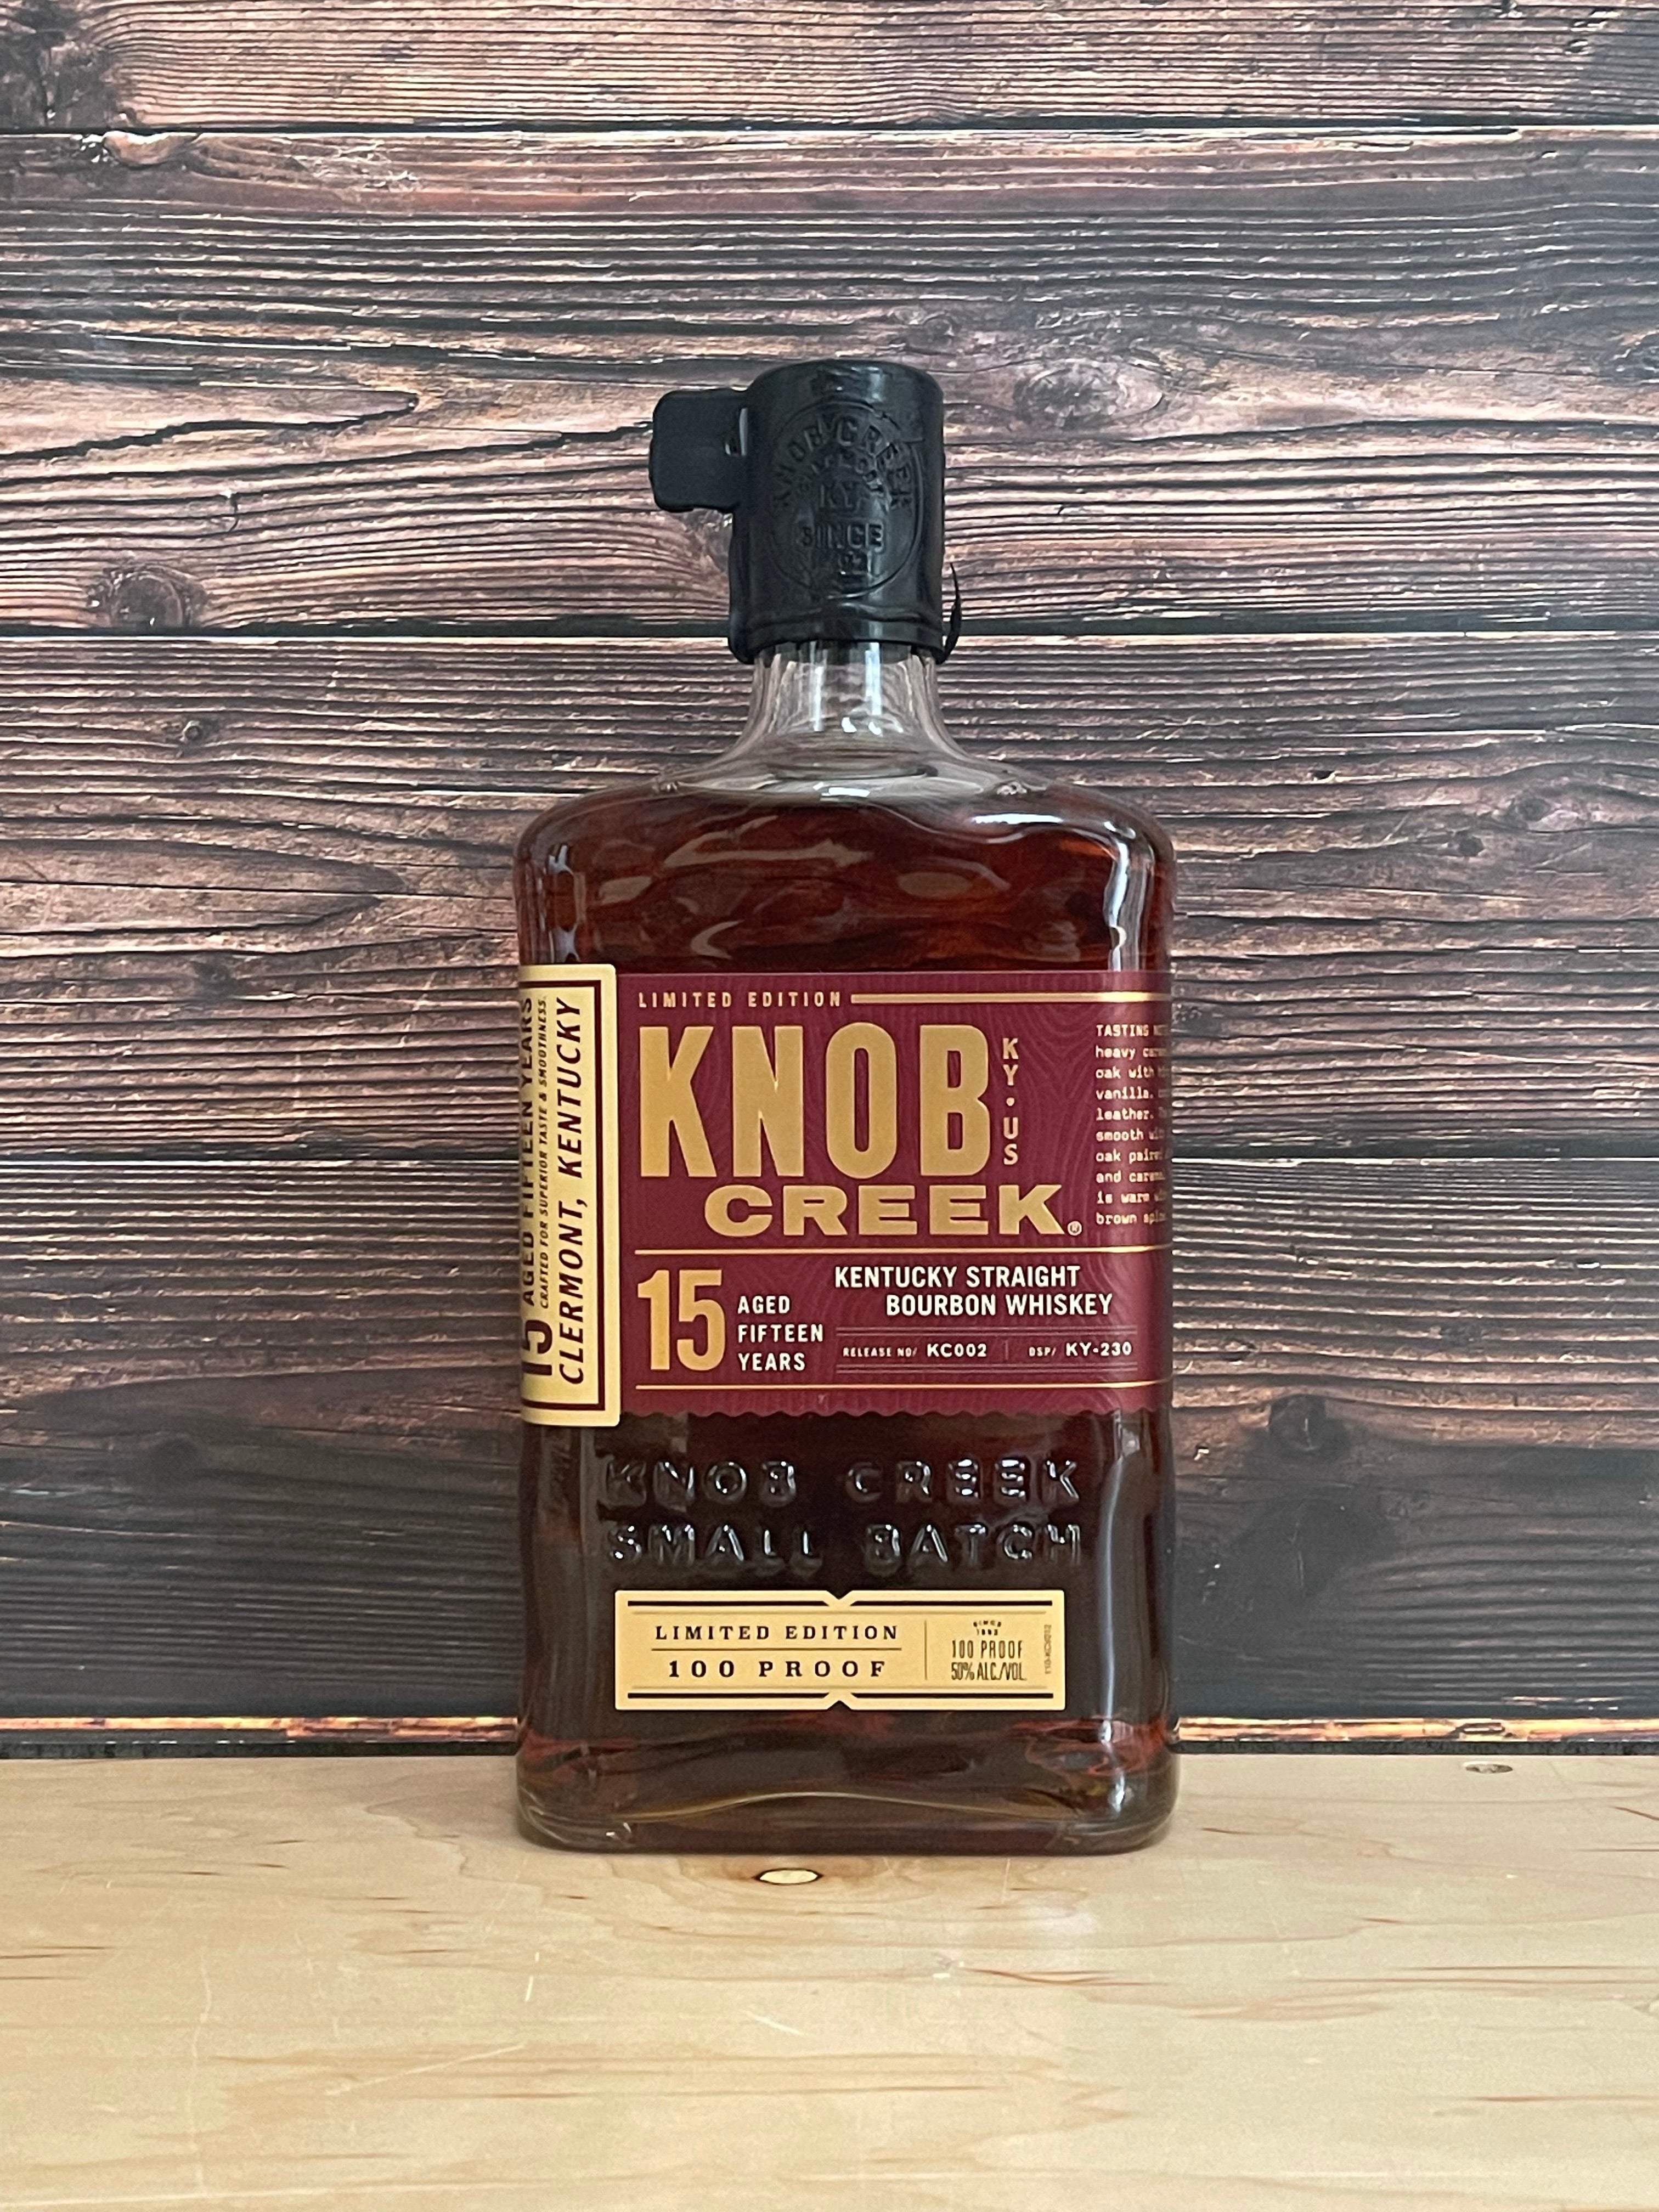 Knob Creek Aged 15 Years Bourbon Whiskey (2021 Limited Edition)